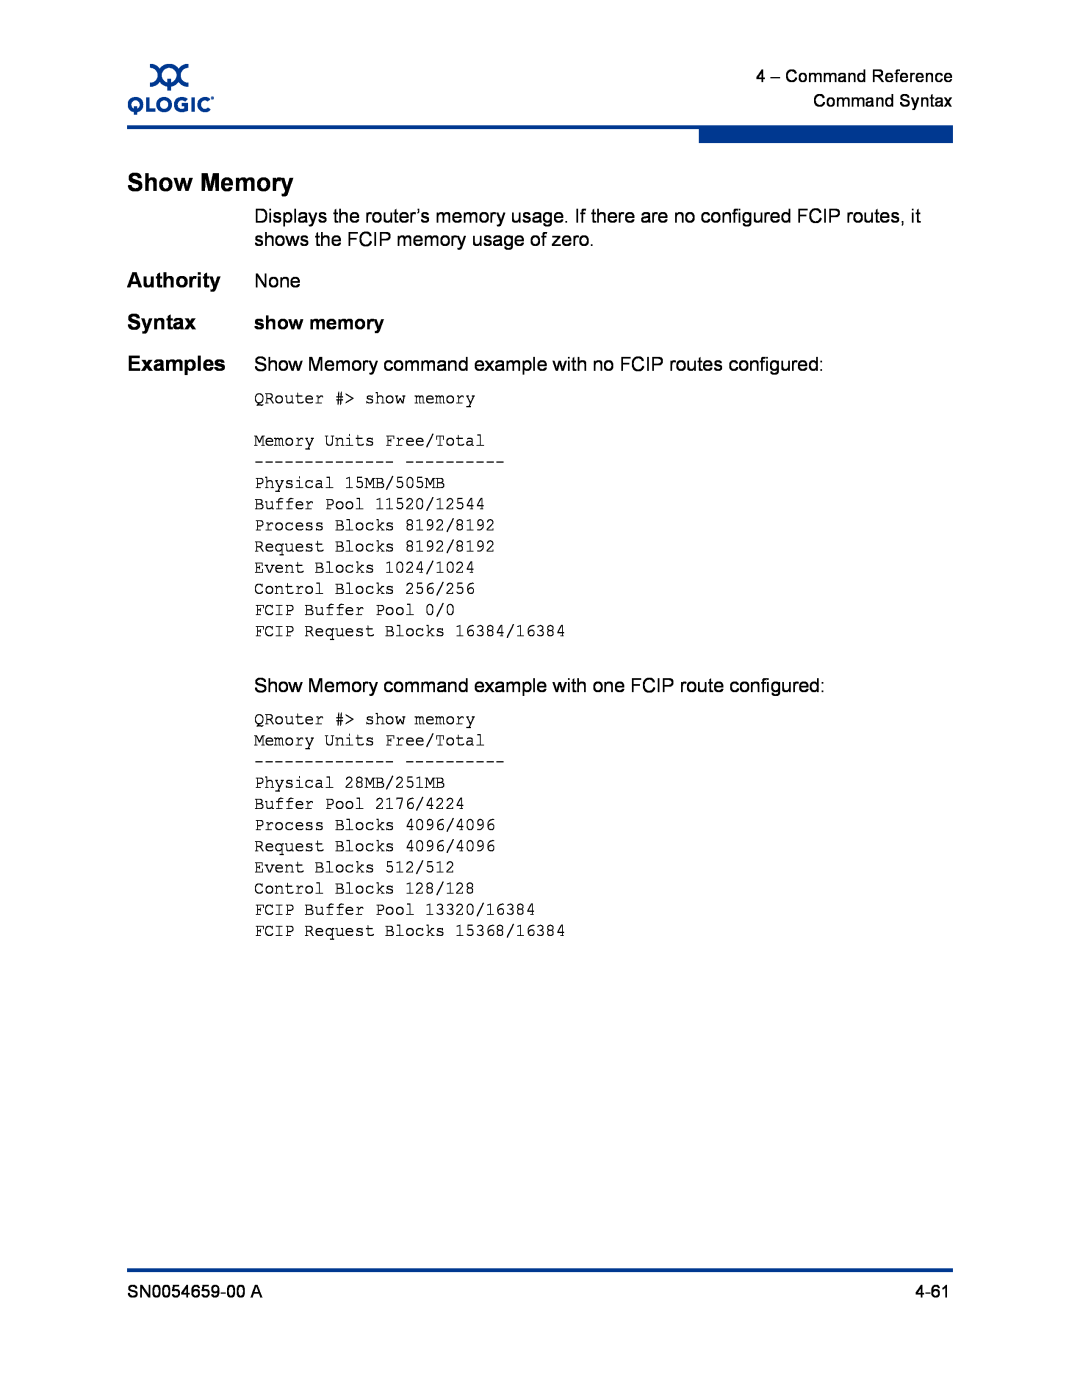 Q-Logic ISR6142 manual Show Memory, Authority None, Syntax show memory 